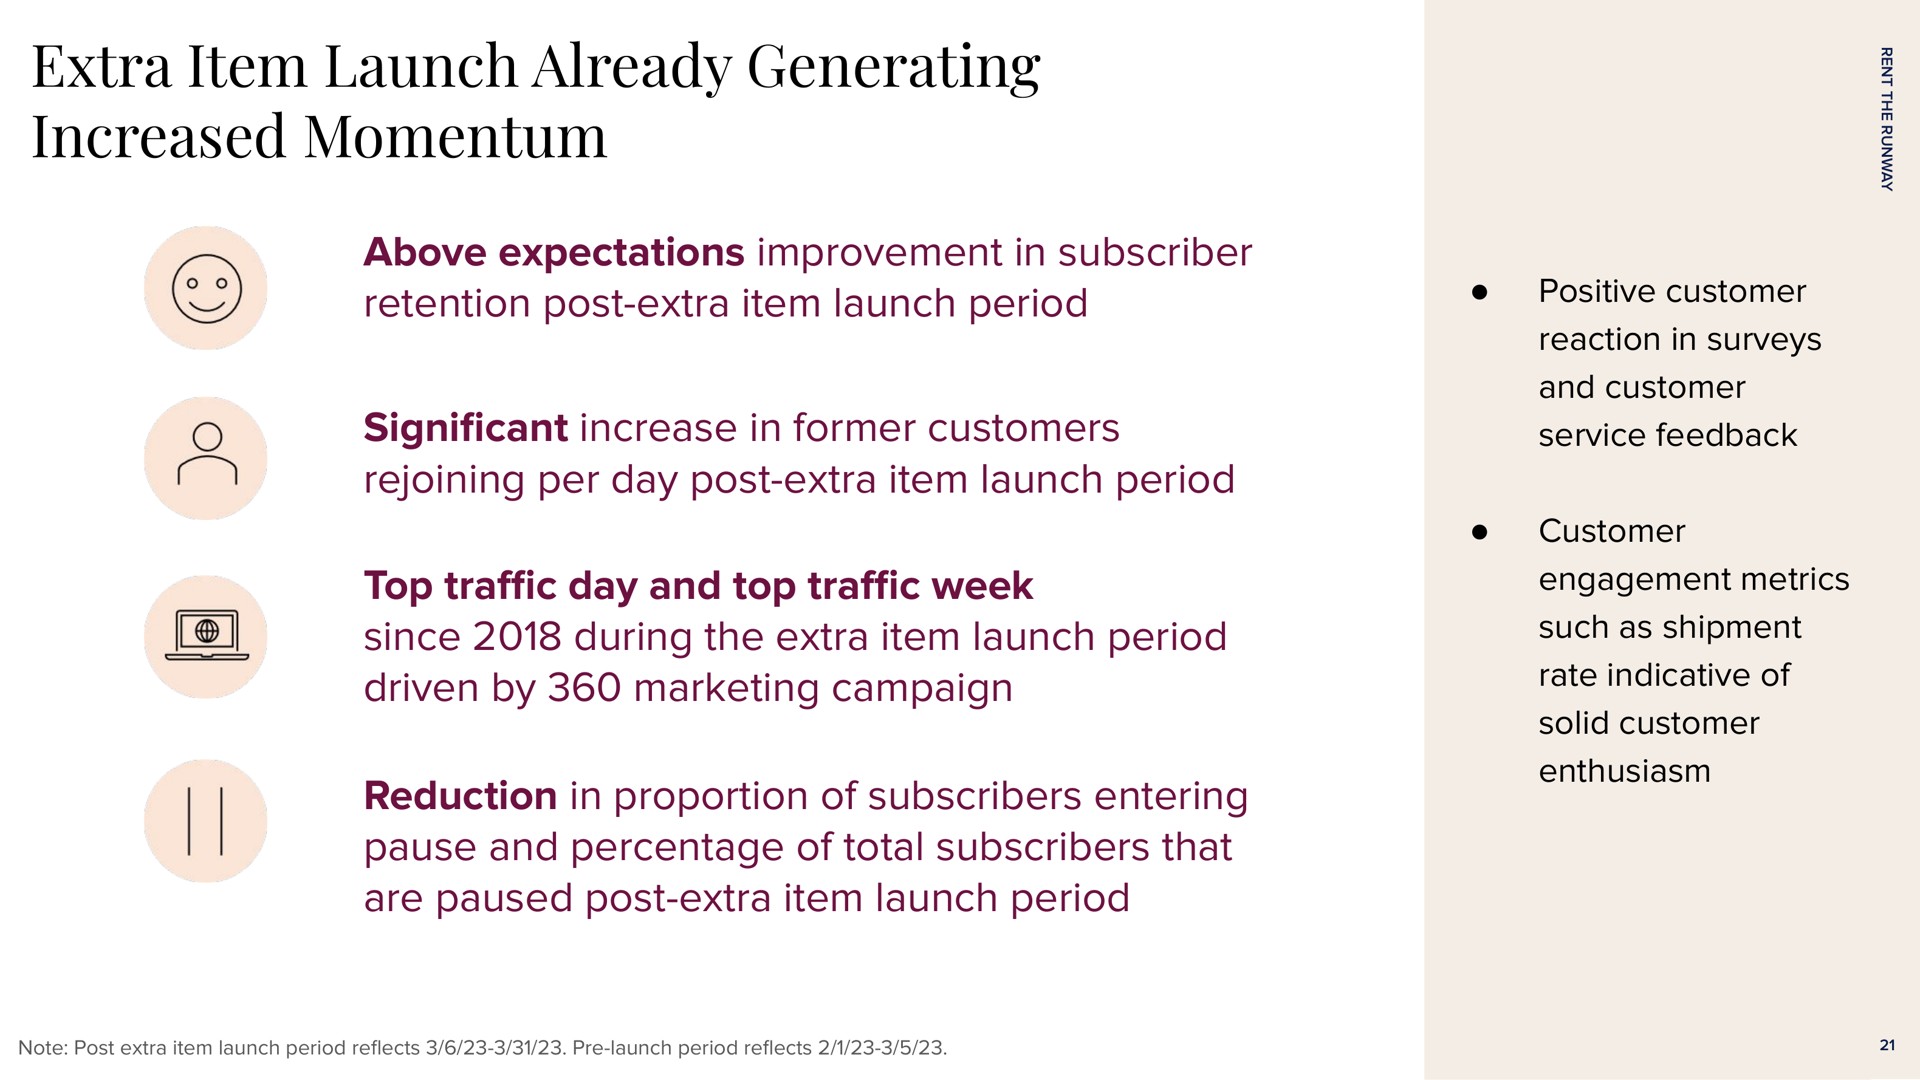 extra item launch already generating increased momentum above expectations improvement in subscriber retention post extra item launch period cant increase in former customers rejoining per day post extra item launch period top tra day and top tra week since during the extra item launch period driven by marketing campaign reduction in proportion of subscribers entering pause and percentage of total subscribers that are paused post extra item launch period positive customer reaction in surveys and customer service feedback customer engagement metrics such as shipment rate indicative of solid customer enthusiasm | Rent The Runway